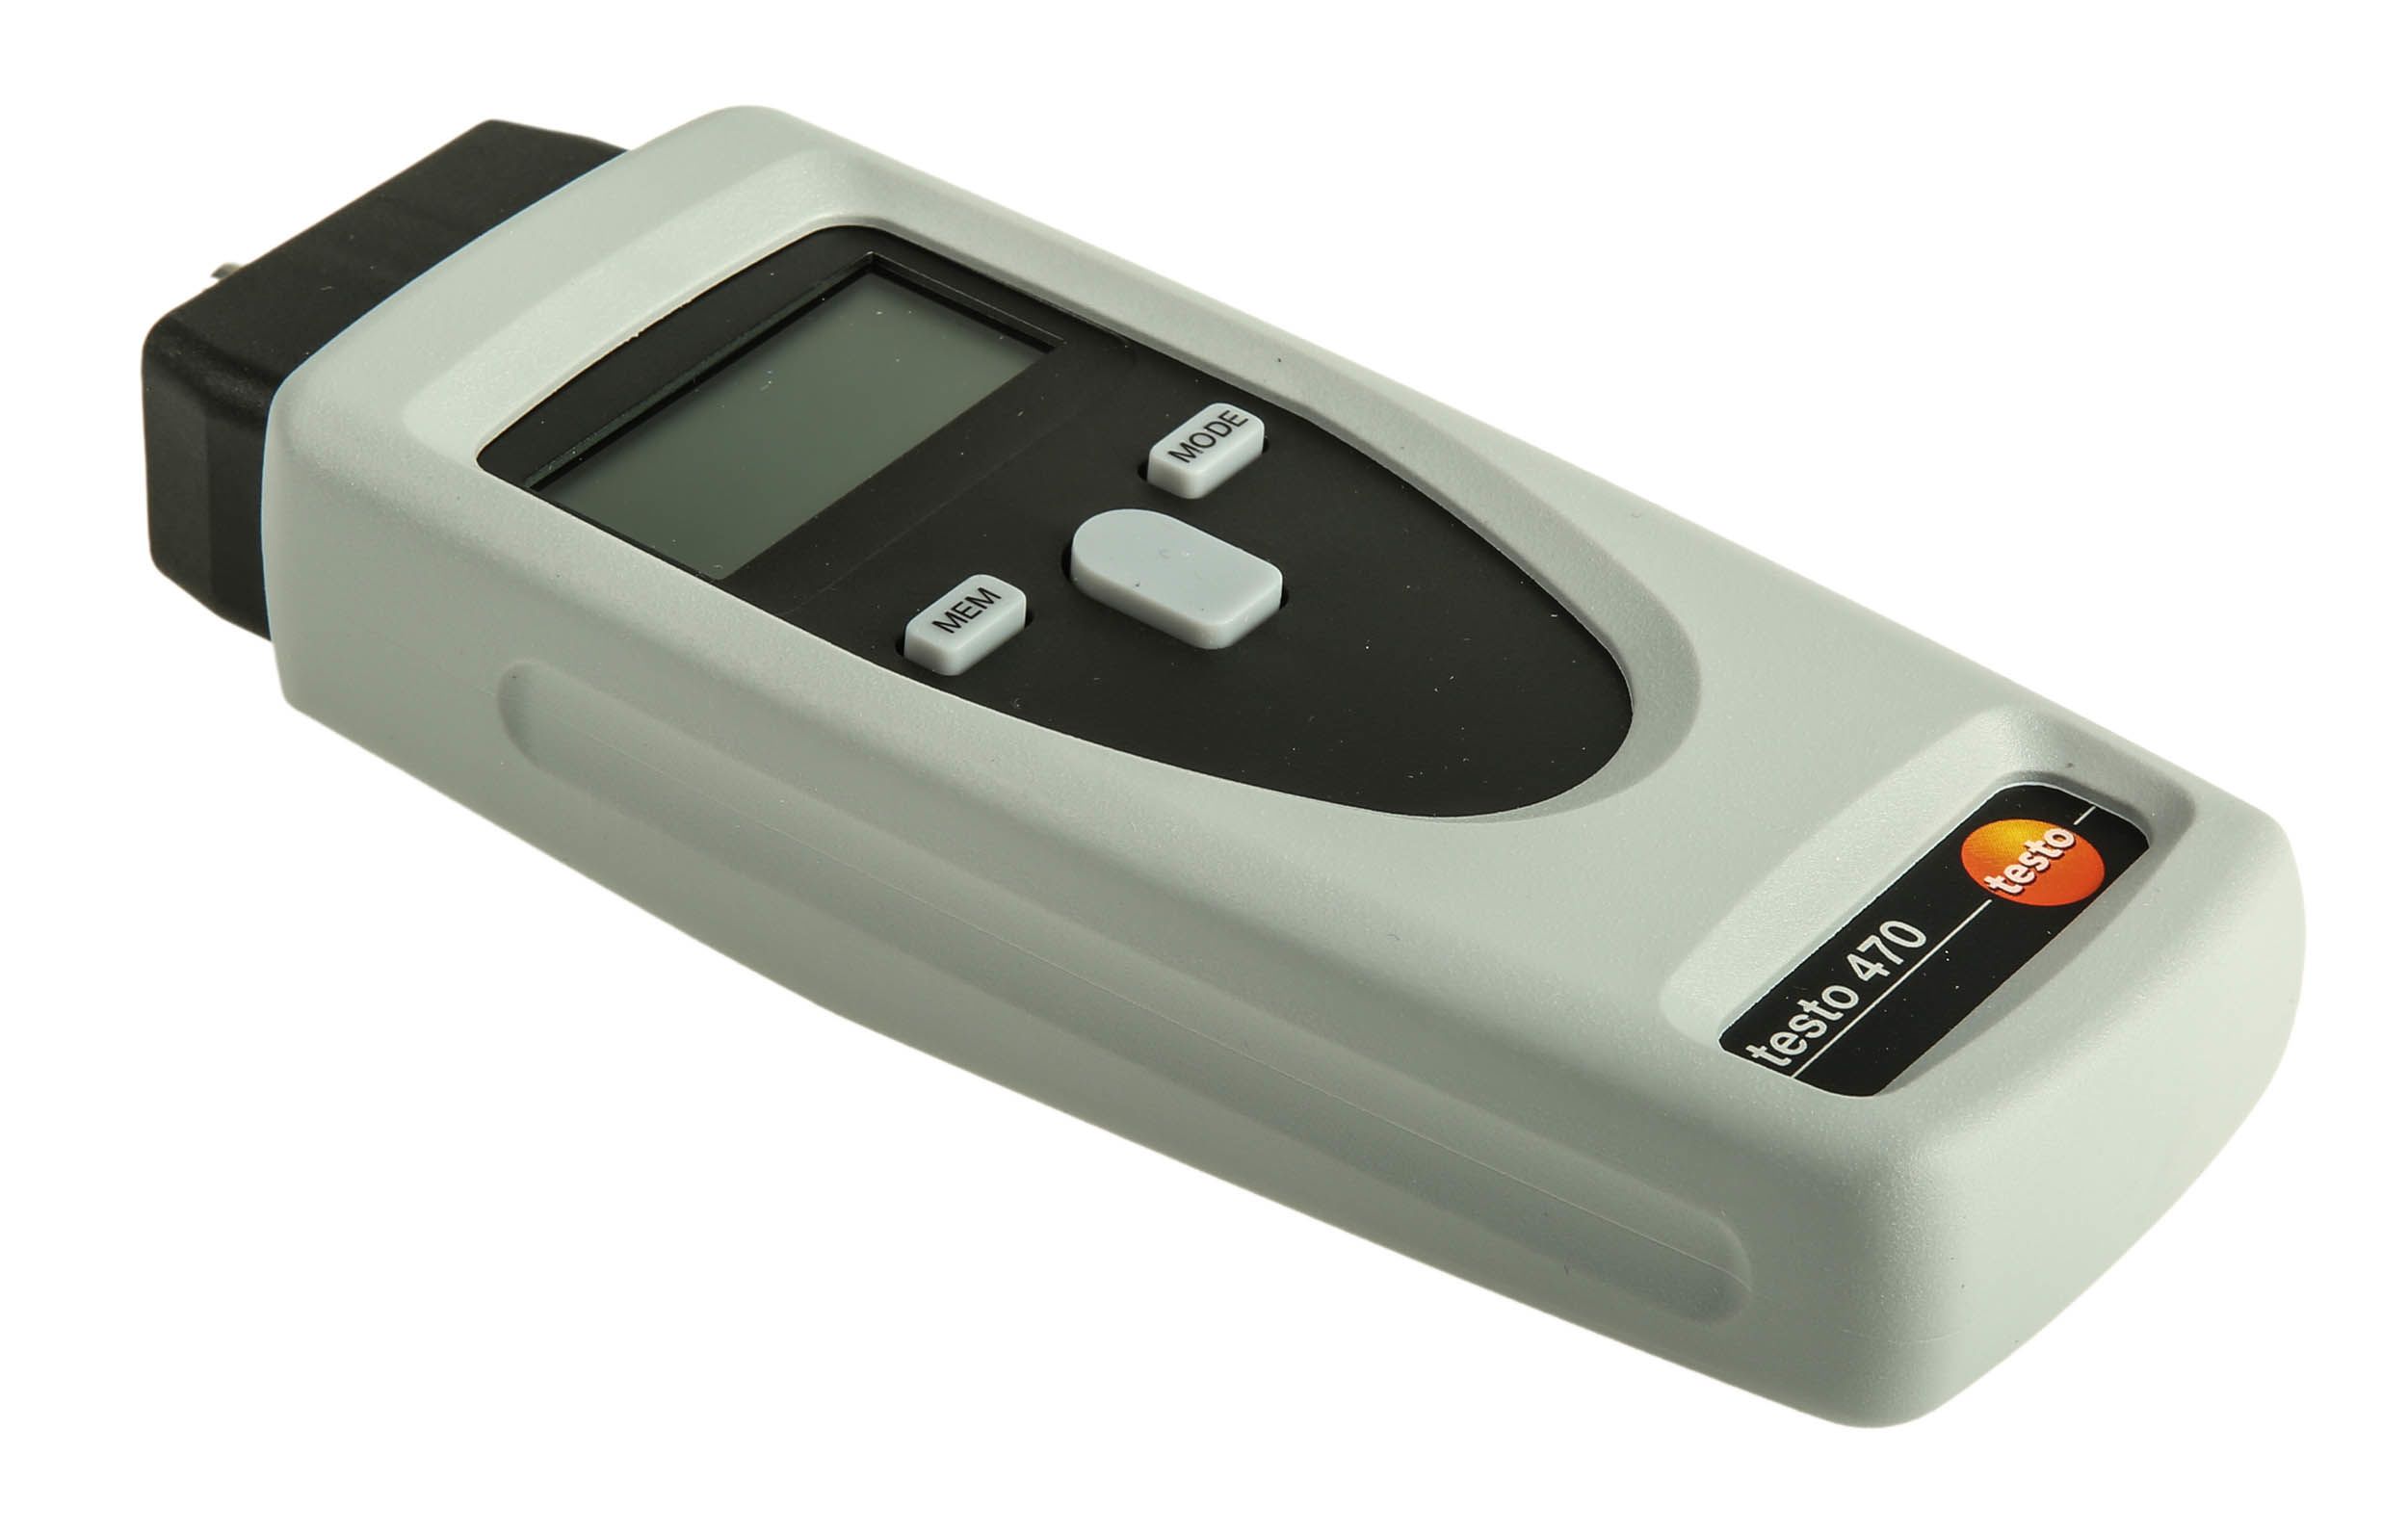 Testo Tachometer Best Accuracy ±0.02 % - Contact, Optical LCD 99999rpm